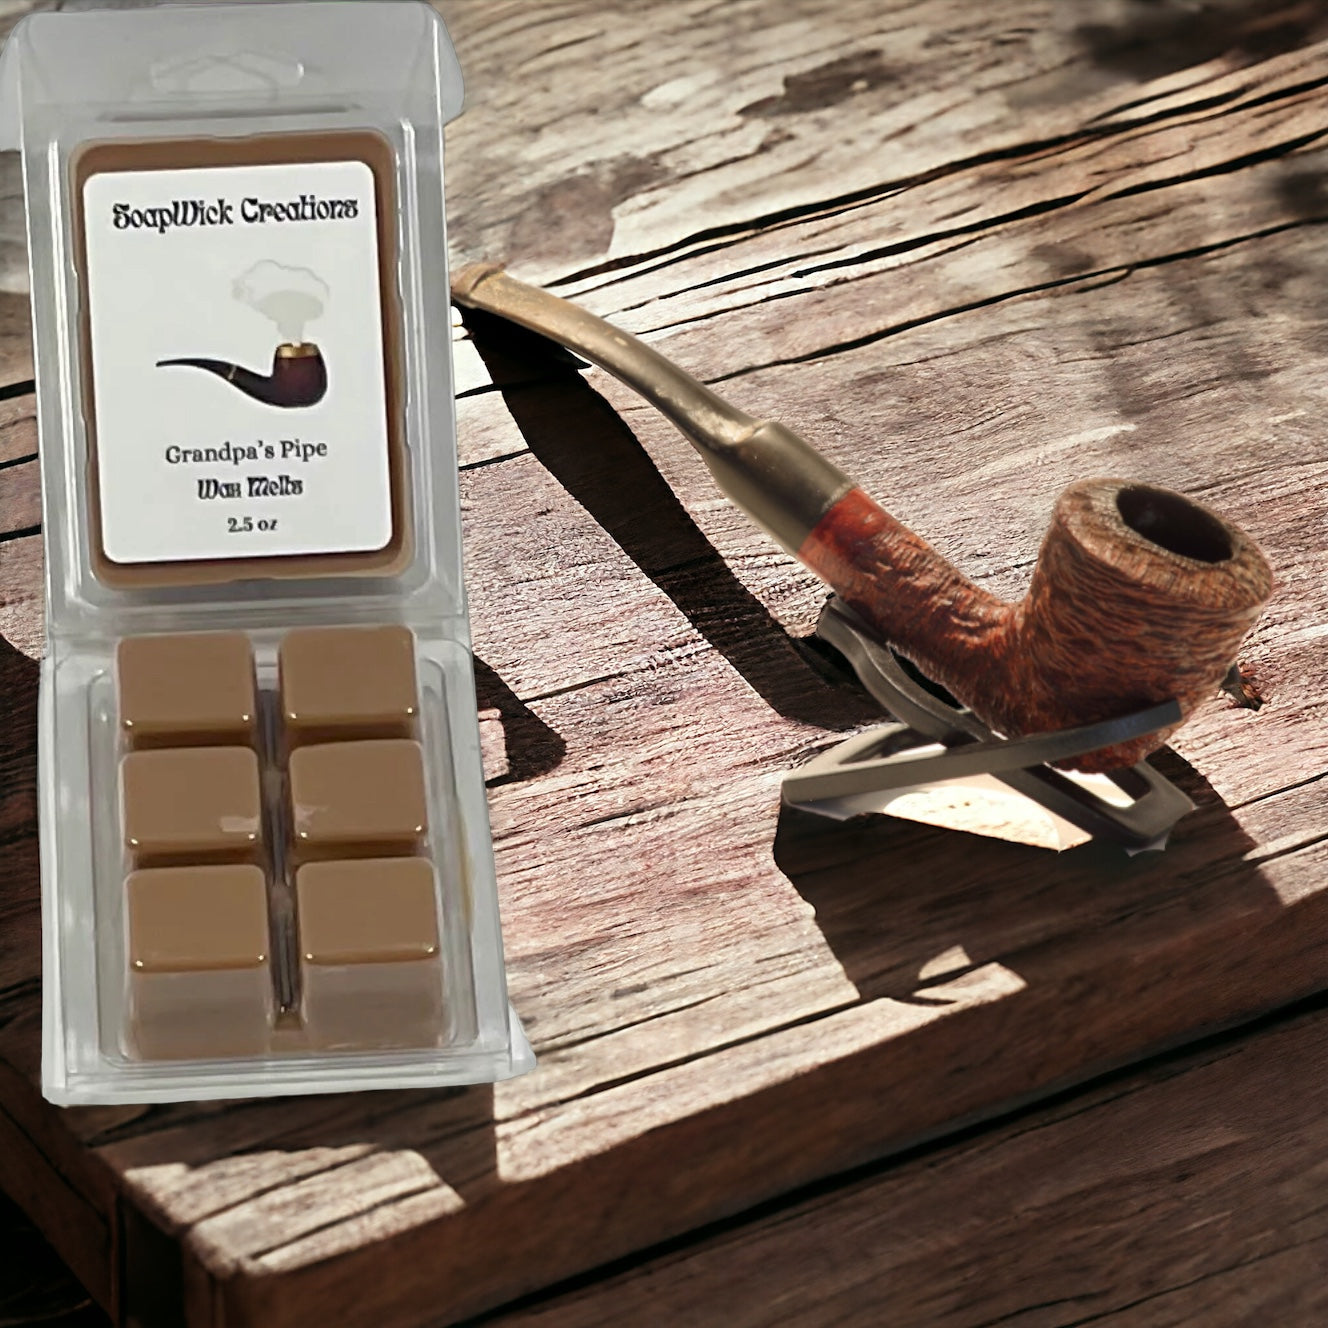 Brown colored Cherry-tobacco scented wax melt “Grandpa‘s Pipe“ sitting on a rustic wooden table.